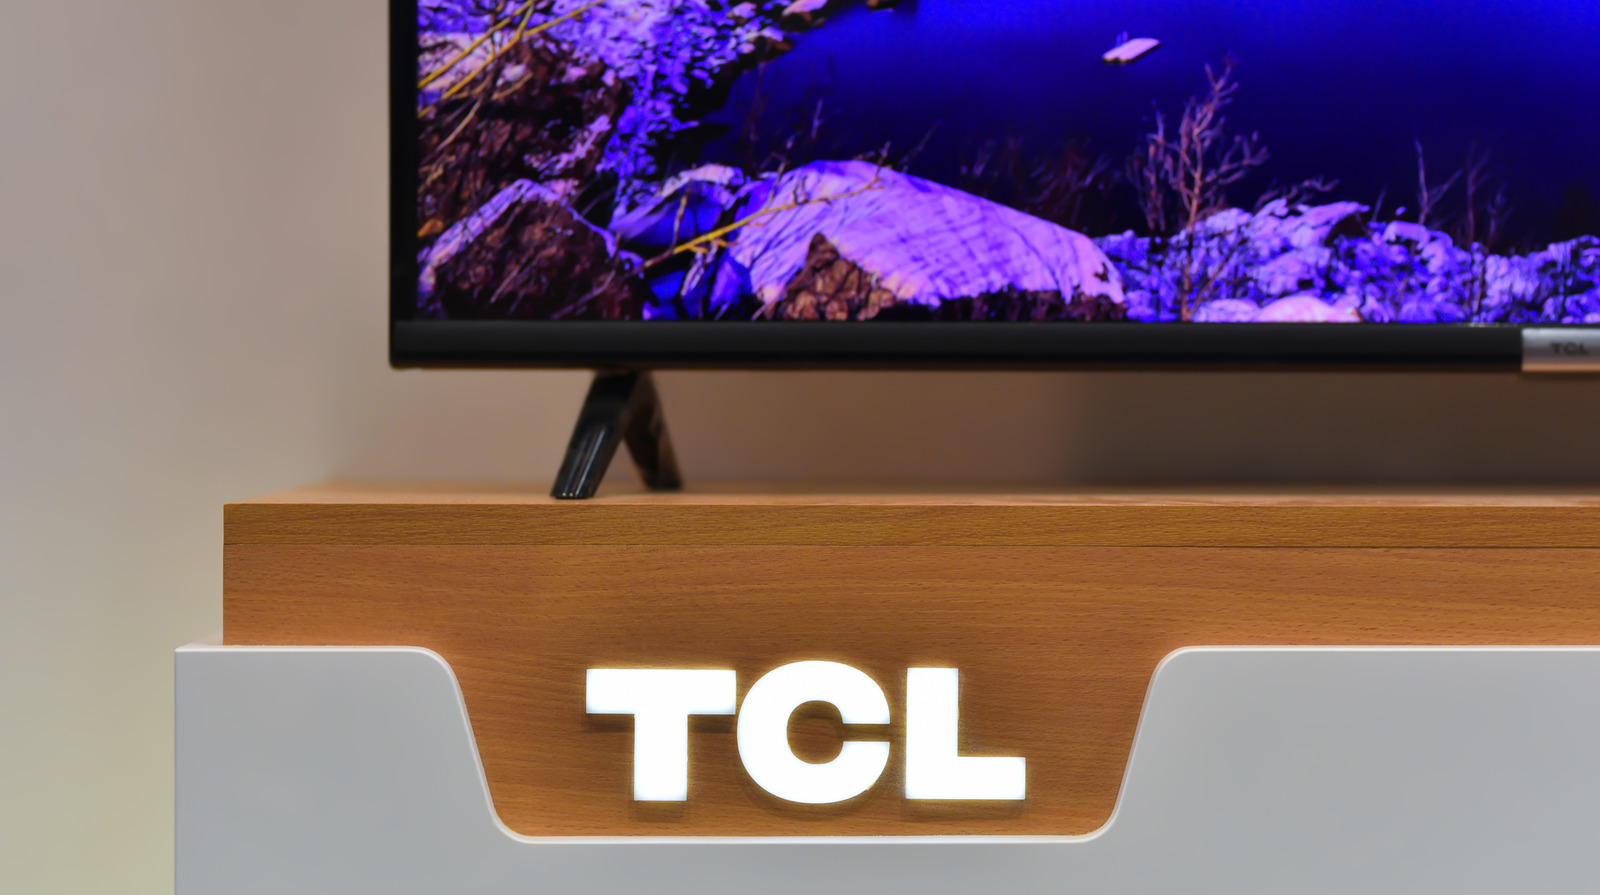 How to Download Apps on TCL Smart Android TV？